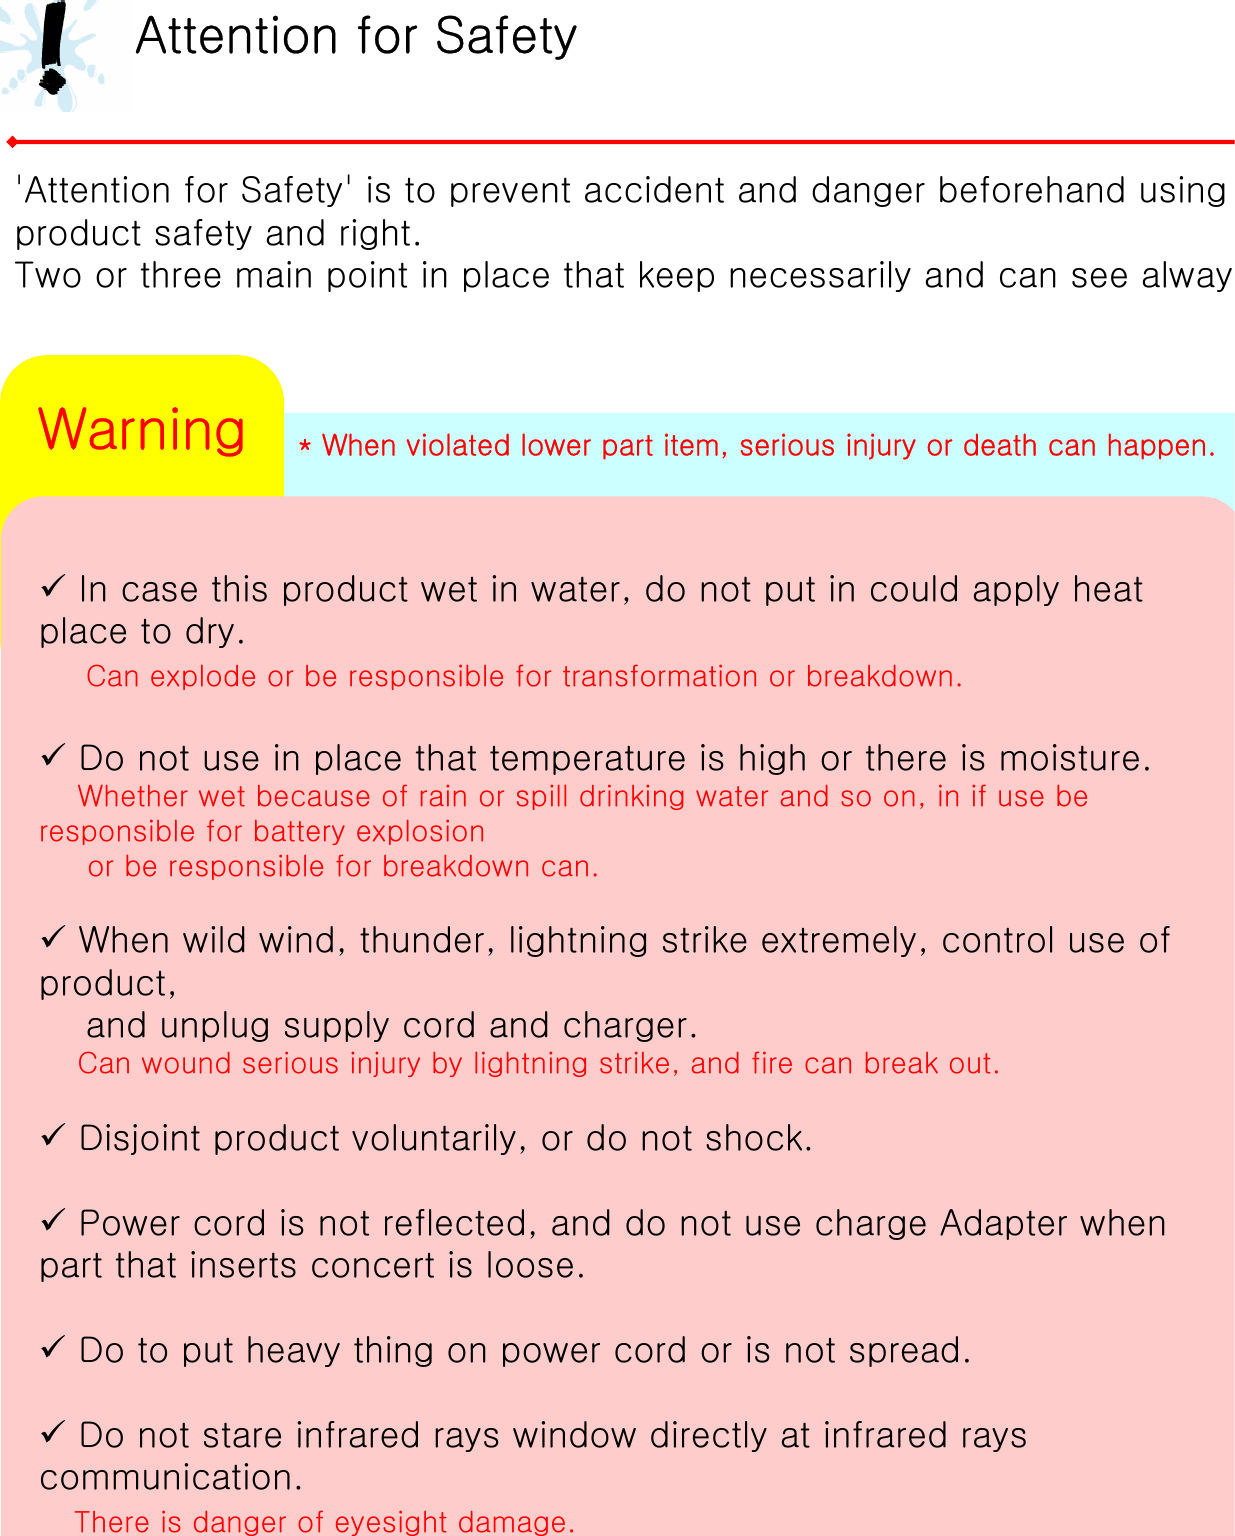 * When violated lower part item, serious injury or death can happen.Attention for Safety&apos;Attention for Safety&apos; is to prevent accident and danger beforehand using product safety and right.Two or three main point in place that keep necessarily and can see alway9In case this product wet in water, do not put in could apply heat place to dry.Can explode or be responsible for transformation or breakdown.9Do not use in place that temperature is high or there is moisture.Whether wet because of rain or spill drinking water and so on, in if use be responsible for battery explosion or be responsible for breakdown can.9When wild wind, thunder, lightning strike extremely, control useof product, and unplug supply cord and charger.Can wound serious injury by lightning strike, and fire can breakout.9Disjoint product voluntarily, or do not shock.9Power cord is not reflected, and do not use charge Adapter when part that inserts concert is loose.9Do to put heavy thing on power cord or is not spread.9Do not stare infrared rays window directly at infrared rays communication.There is danger of eyesight damage.Warning